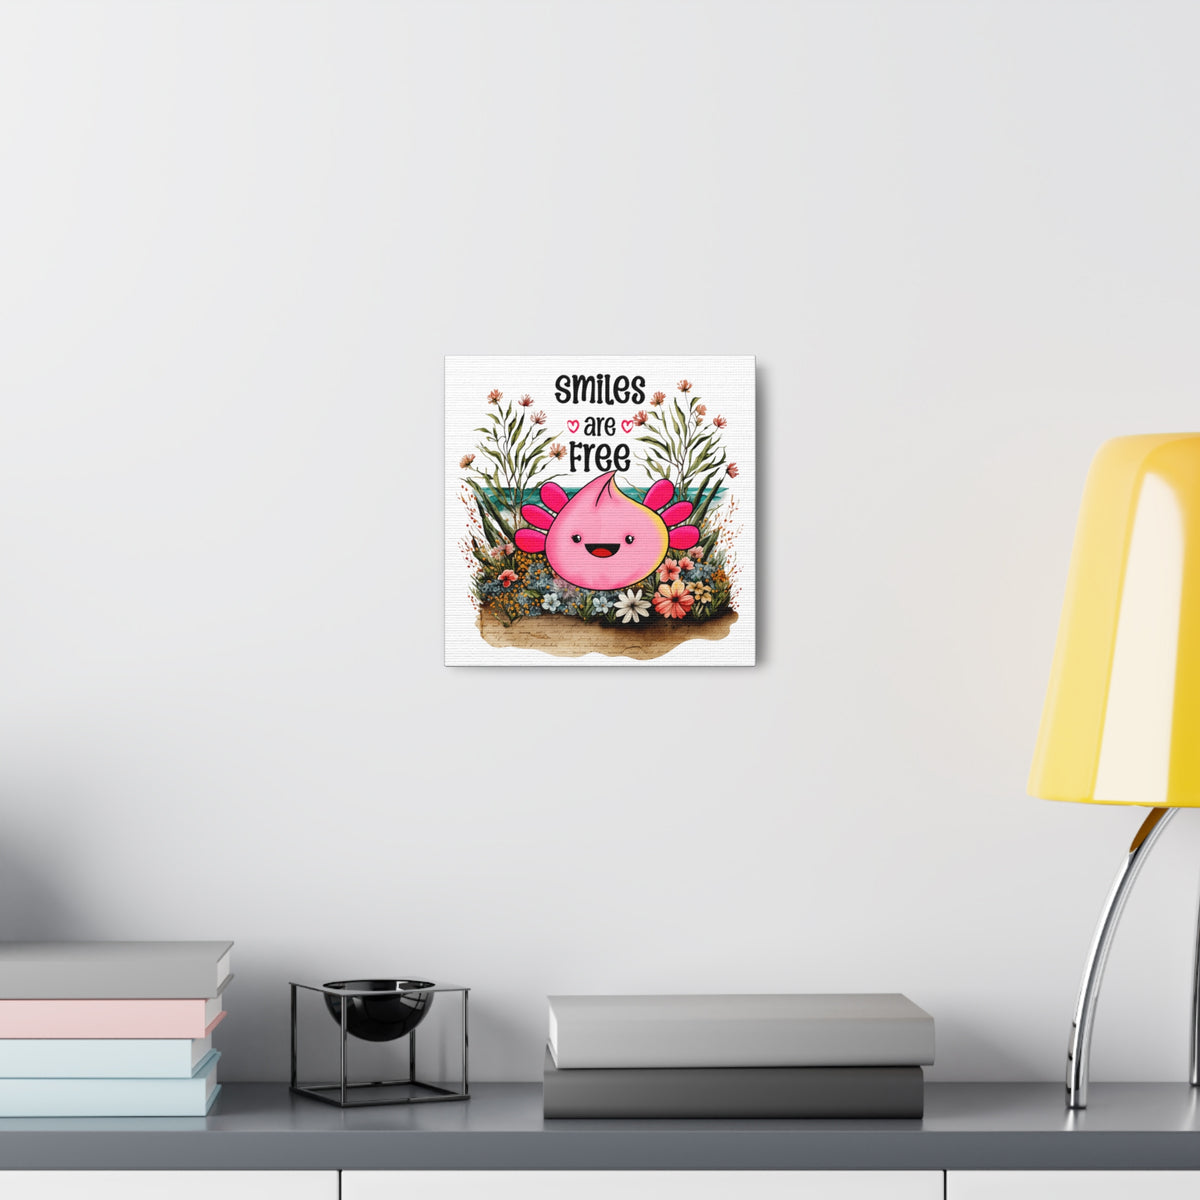 Smiles are Free Pink Smiling Axolotl Canvas Art